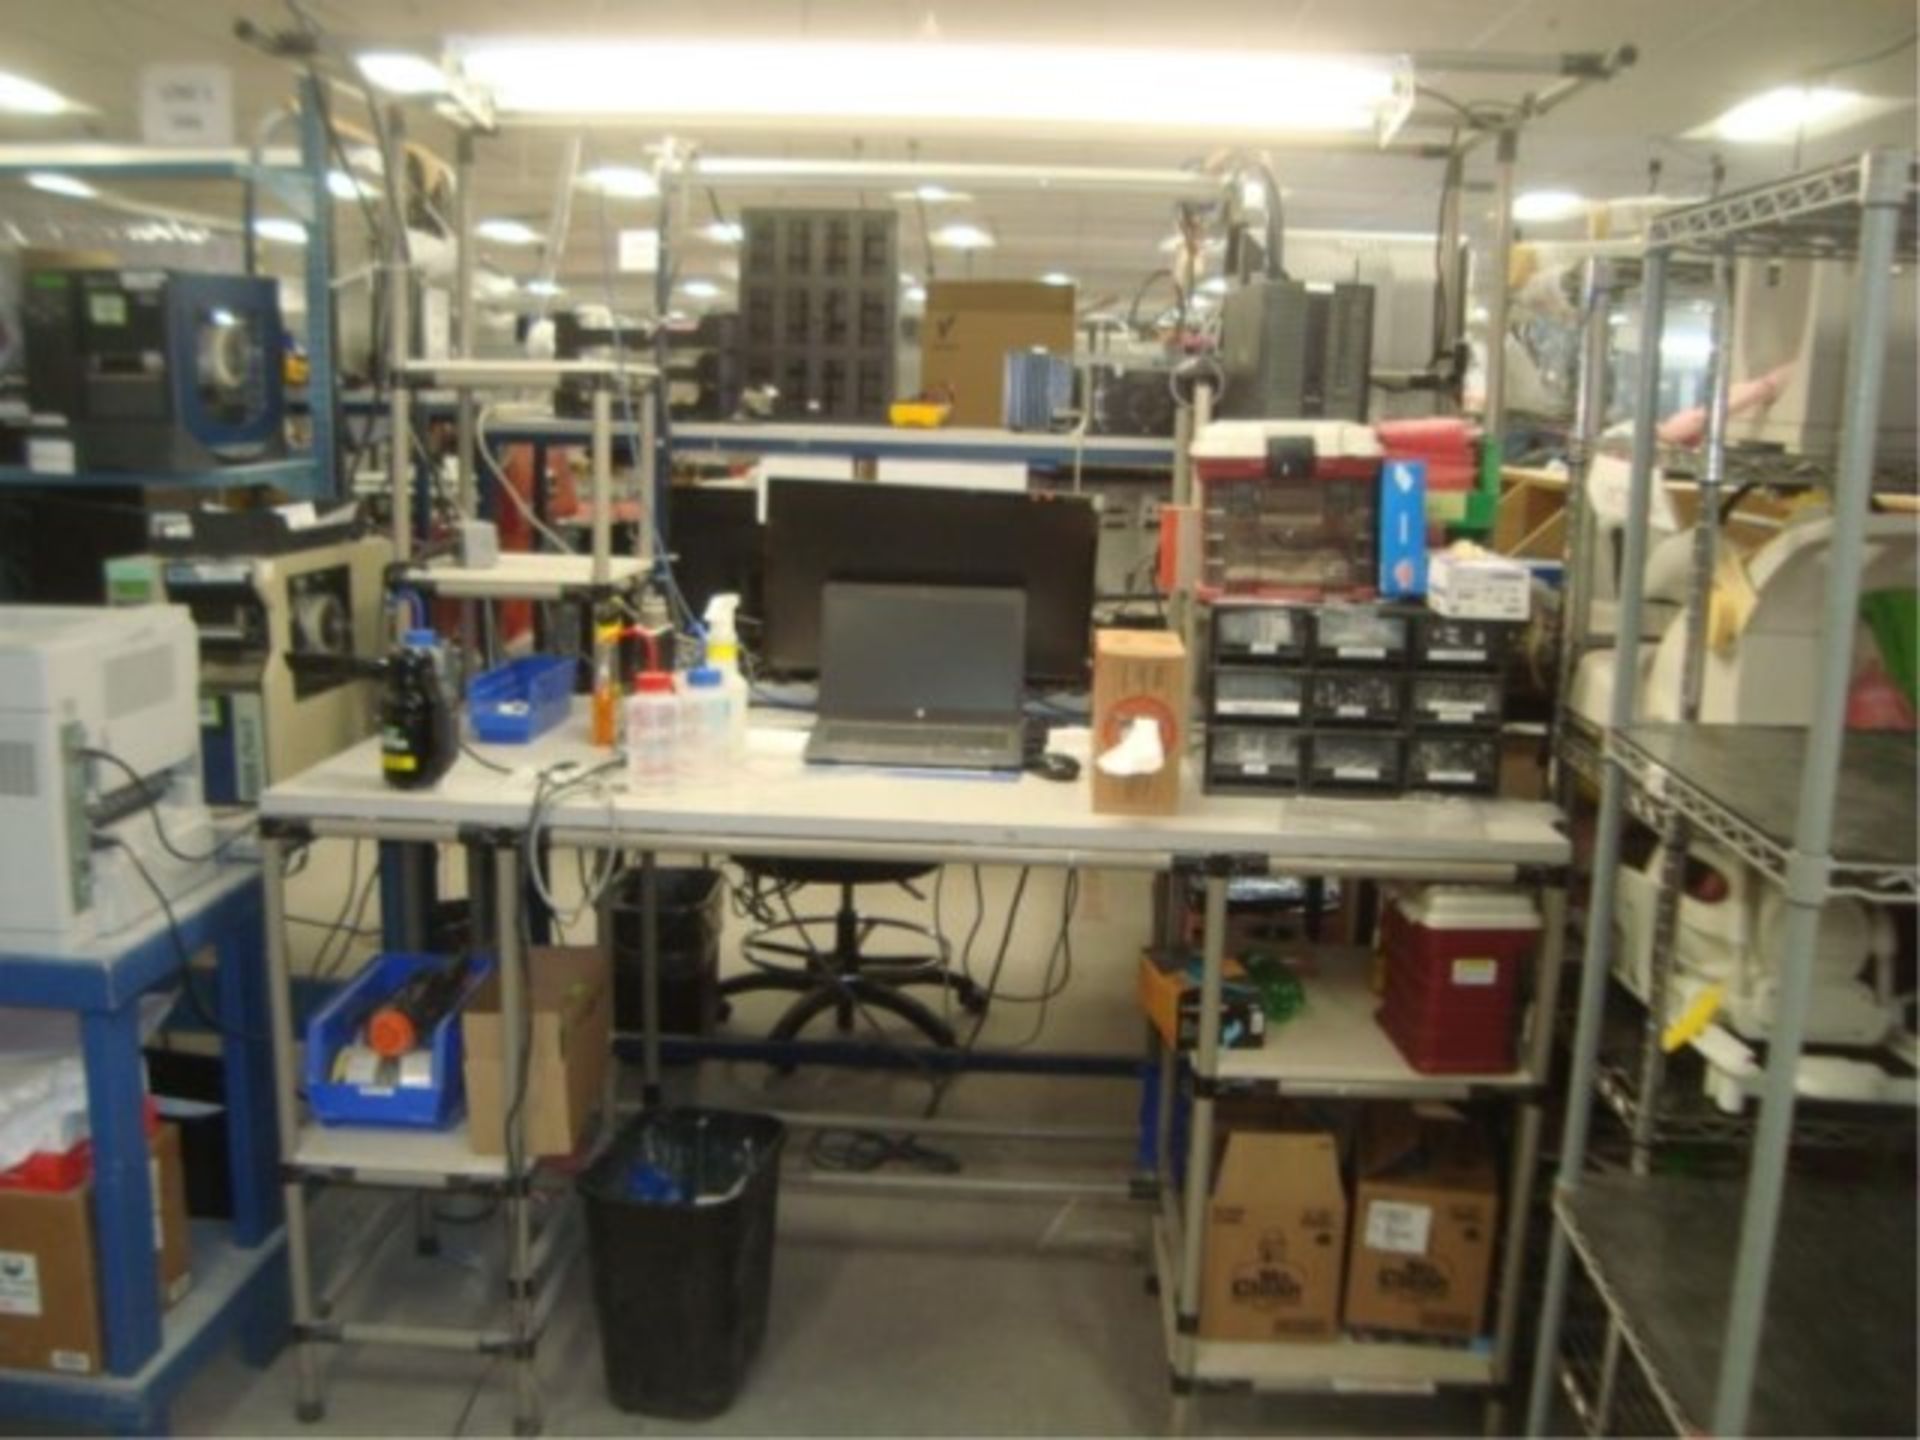 Heavy Duty Workstation Benches - Image 8 of 9